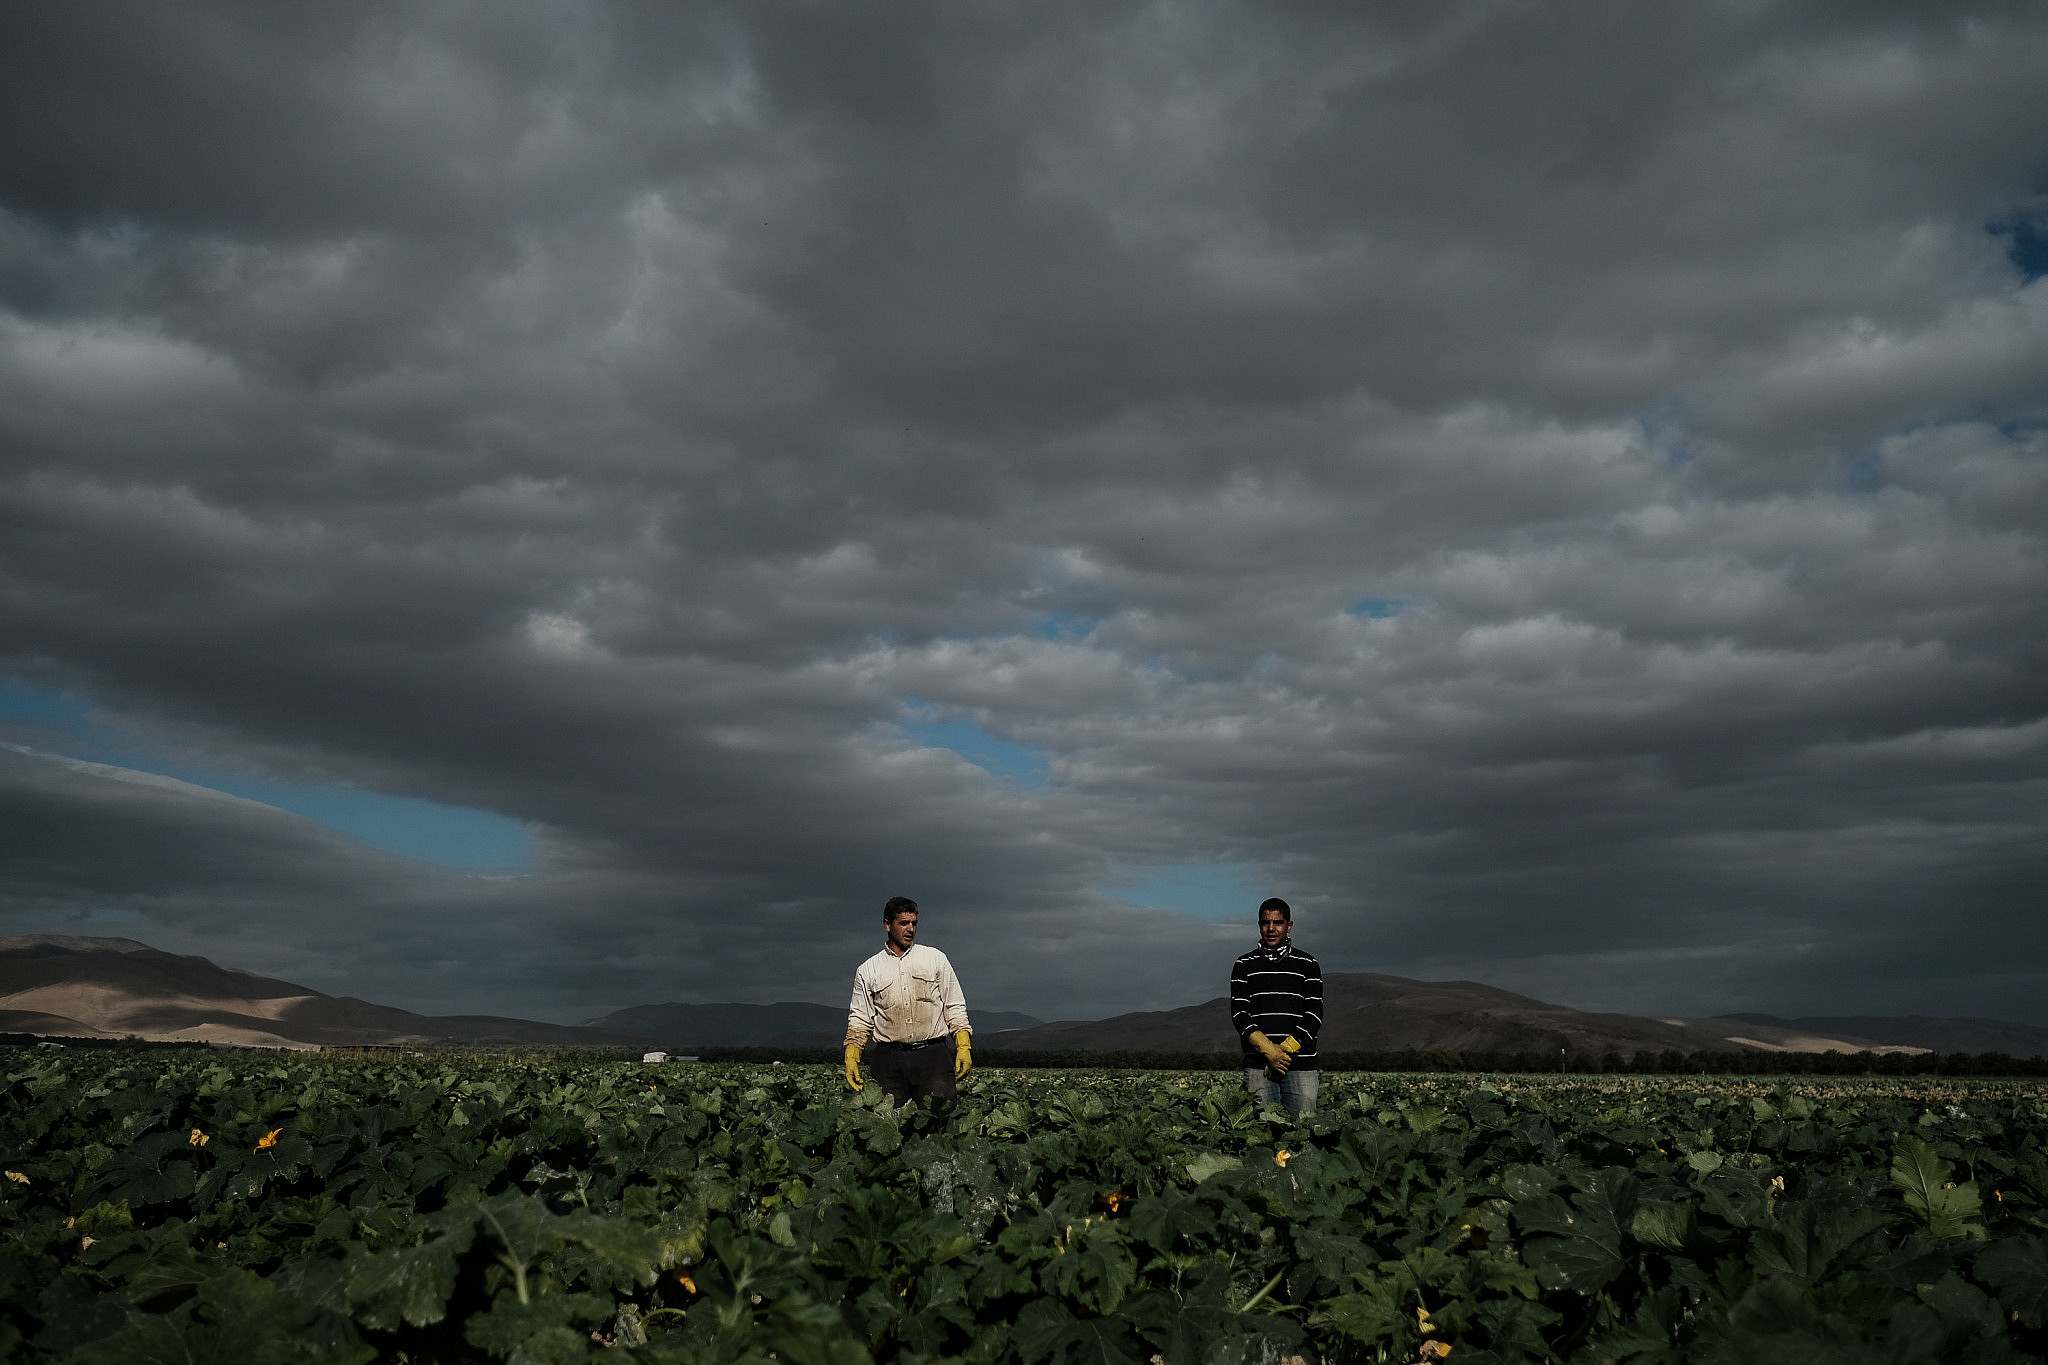 Palestinian workers seen harvesting squash at a field near Moshav Masua, in the Jordan Valley in the occupied West Bank, January 8, 2017. (Yaniv Nadav/Flash90)